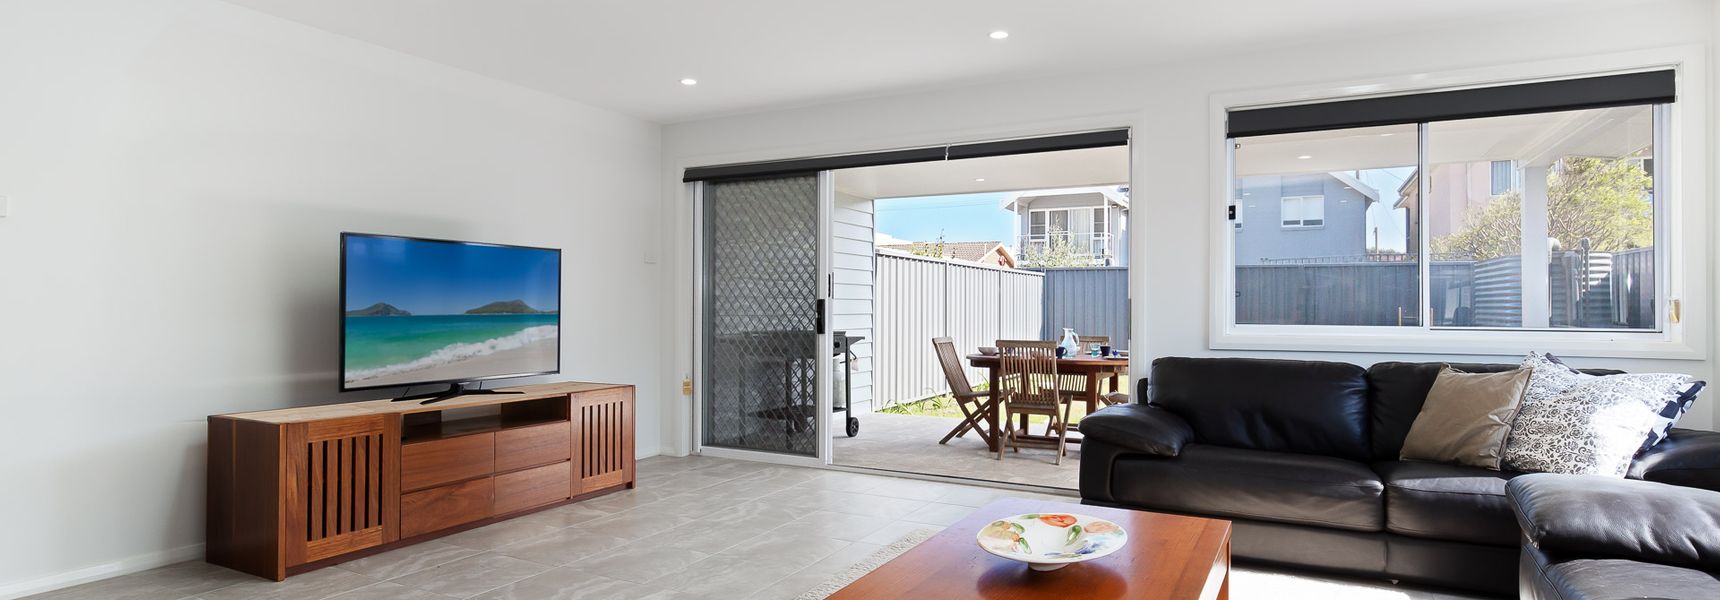 Birubi Breezes, 2/7 Fitzroy St – Large Duplex with Air Conditioning, WIFI & only 5 minute walk to the beach